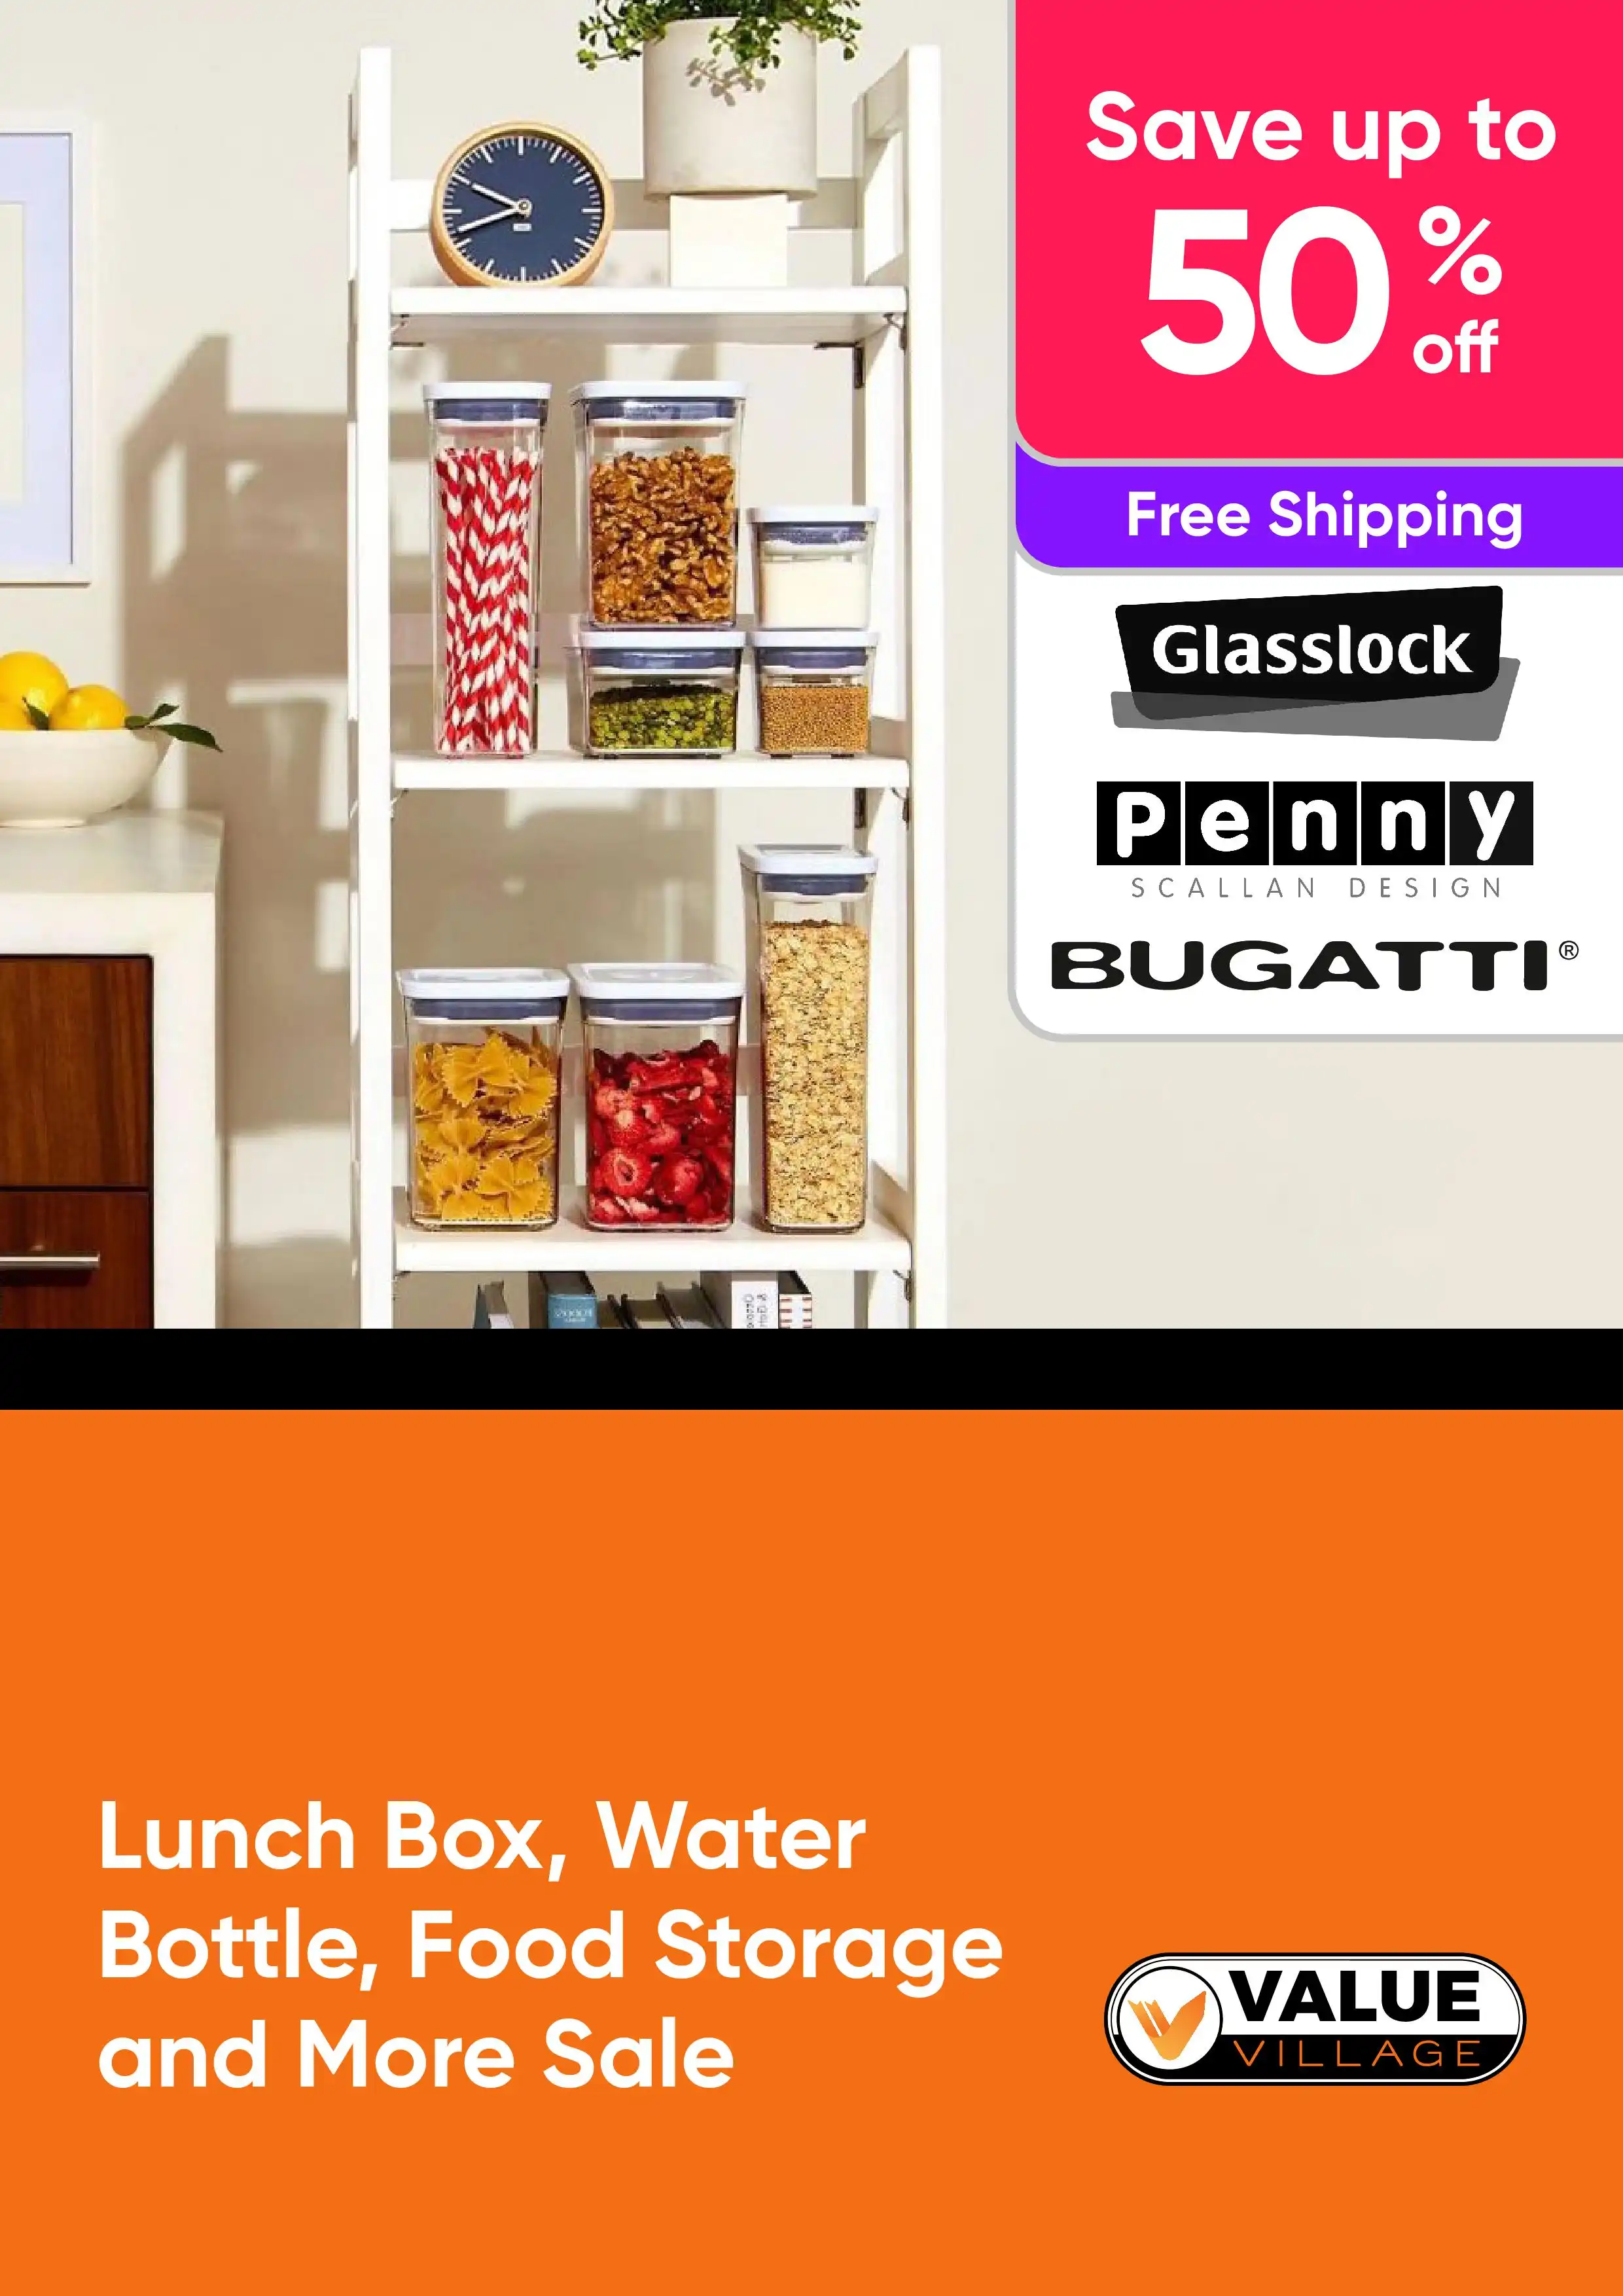 Lunch Box, Water Bottle, Food Storage and More Sale - Glasslock, Penny Scallan, Bugatti - Up to 50% Off 